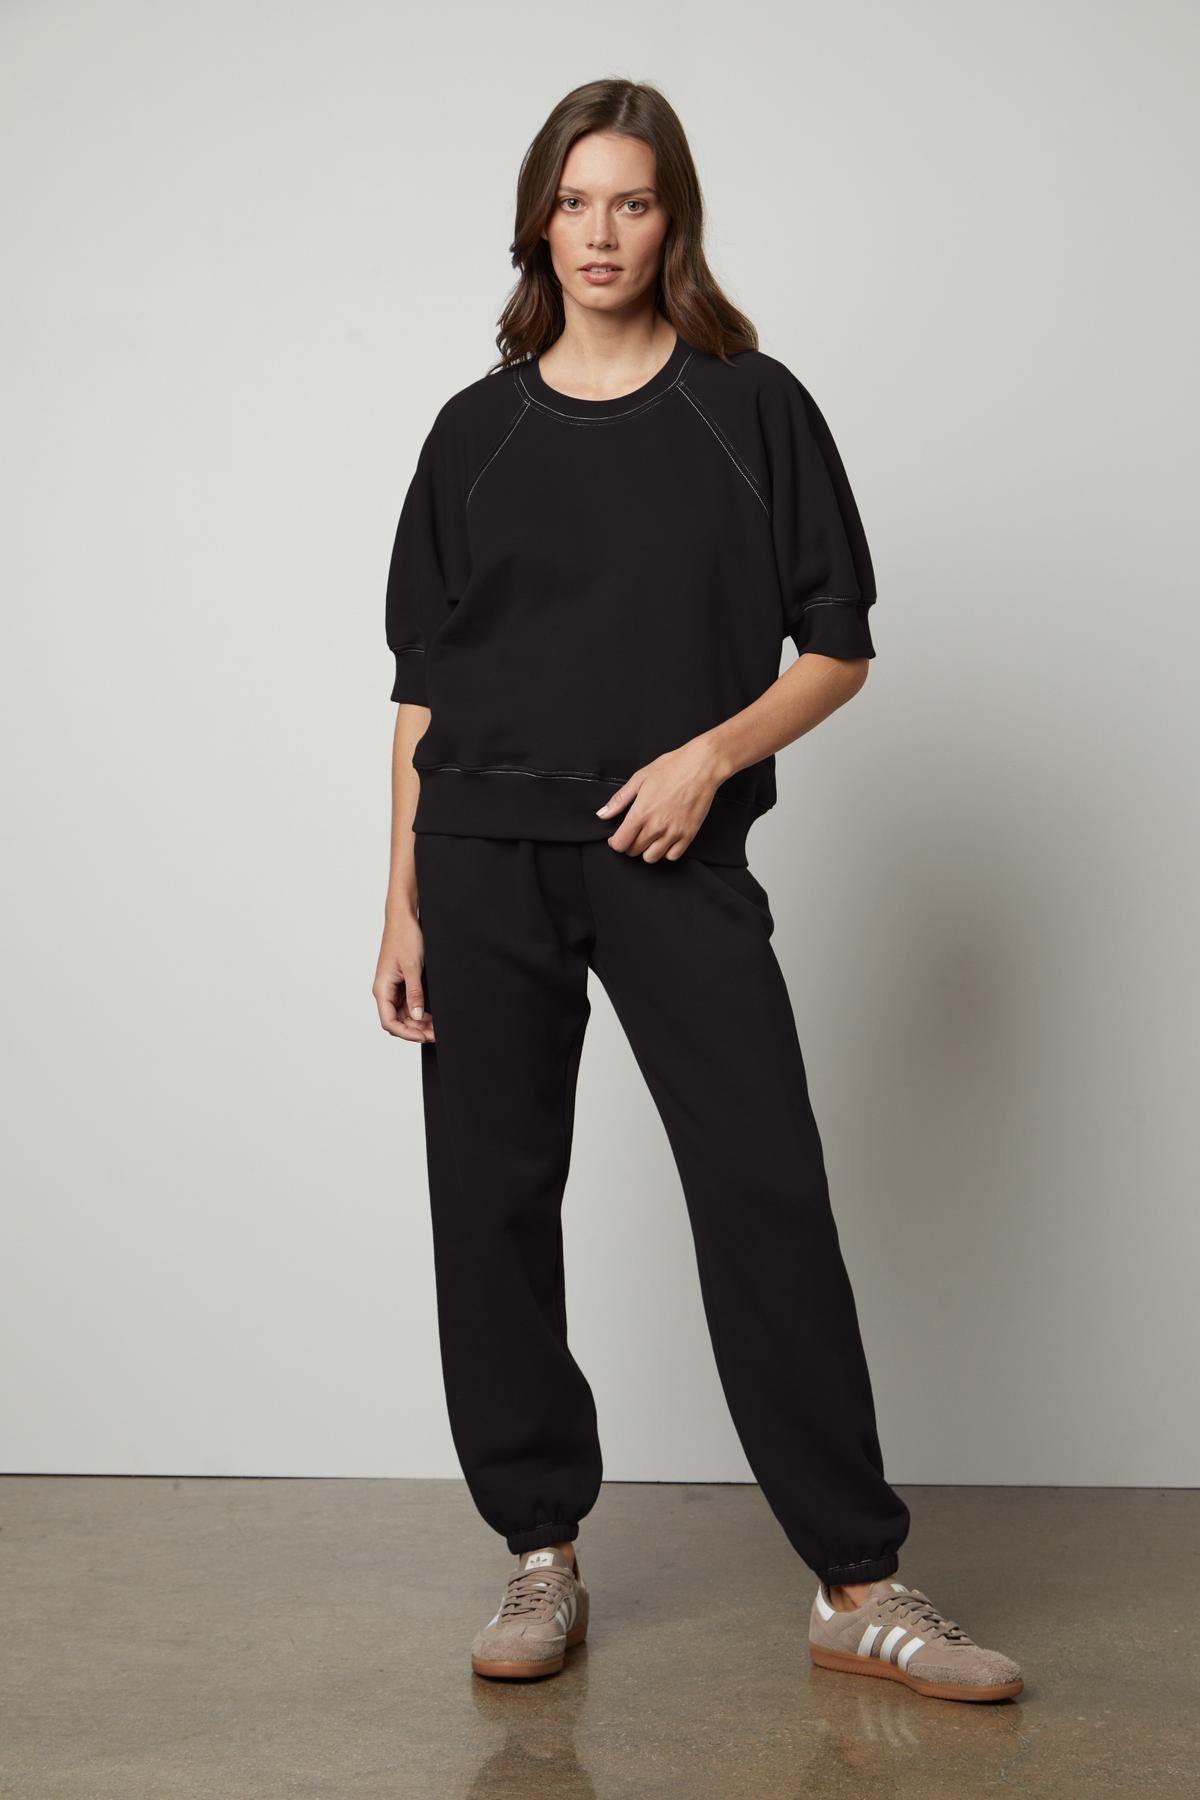 The model is wearing a black sweatshirt for warmth and Velvet by Graham & Spencer joggers for comfort.-35678661214401